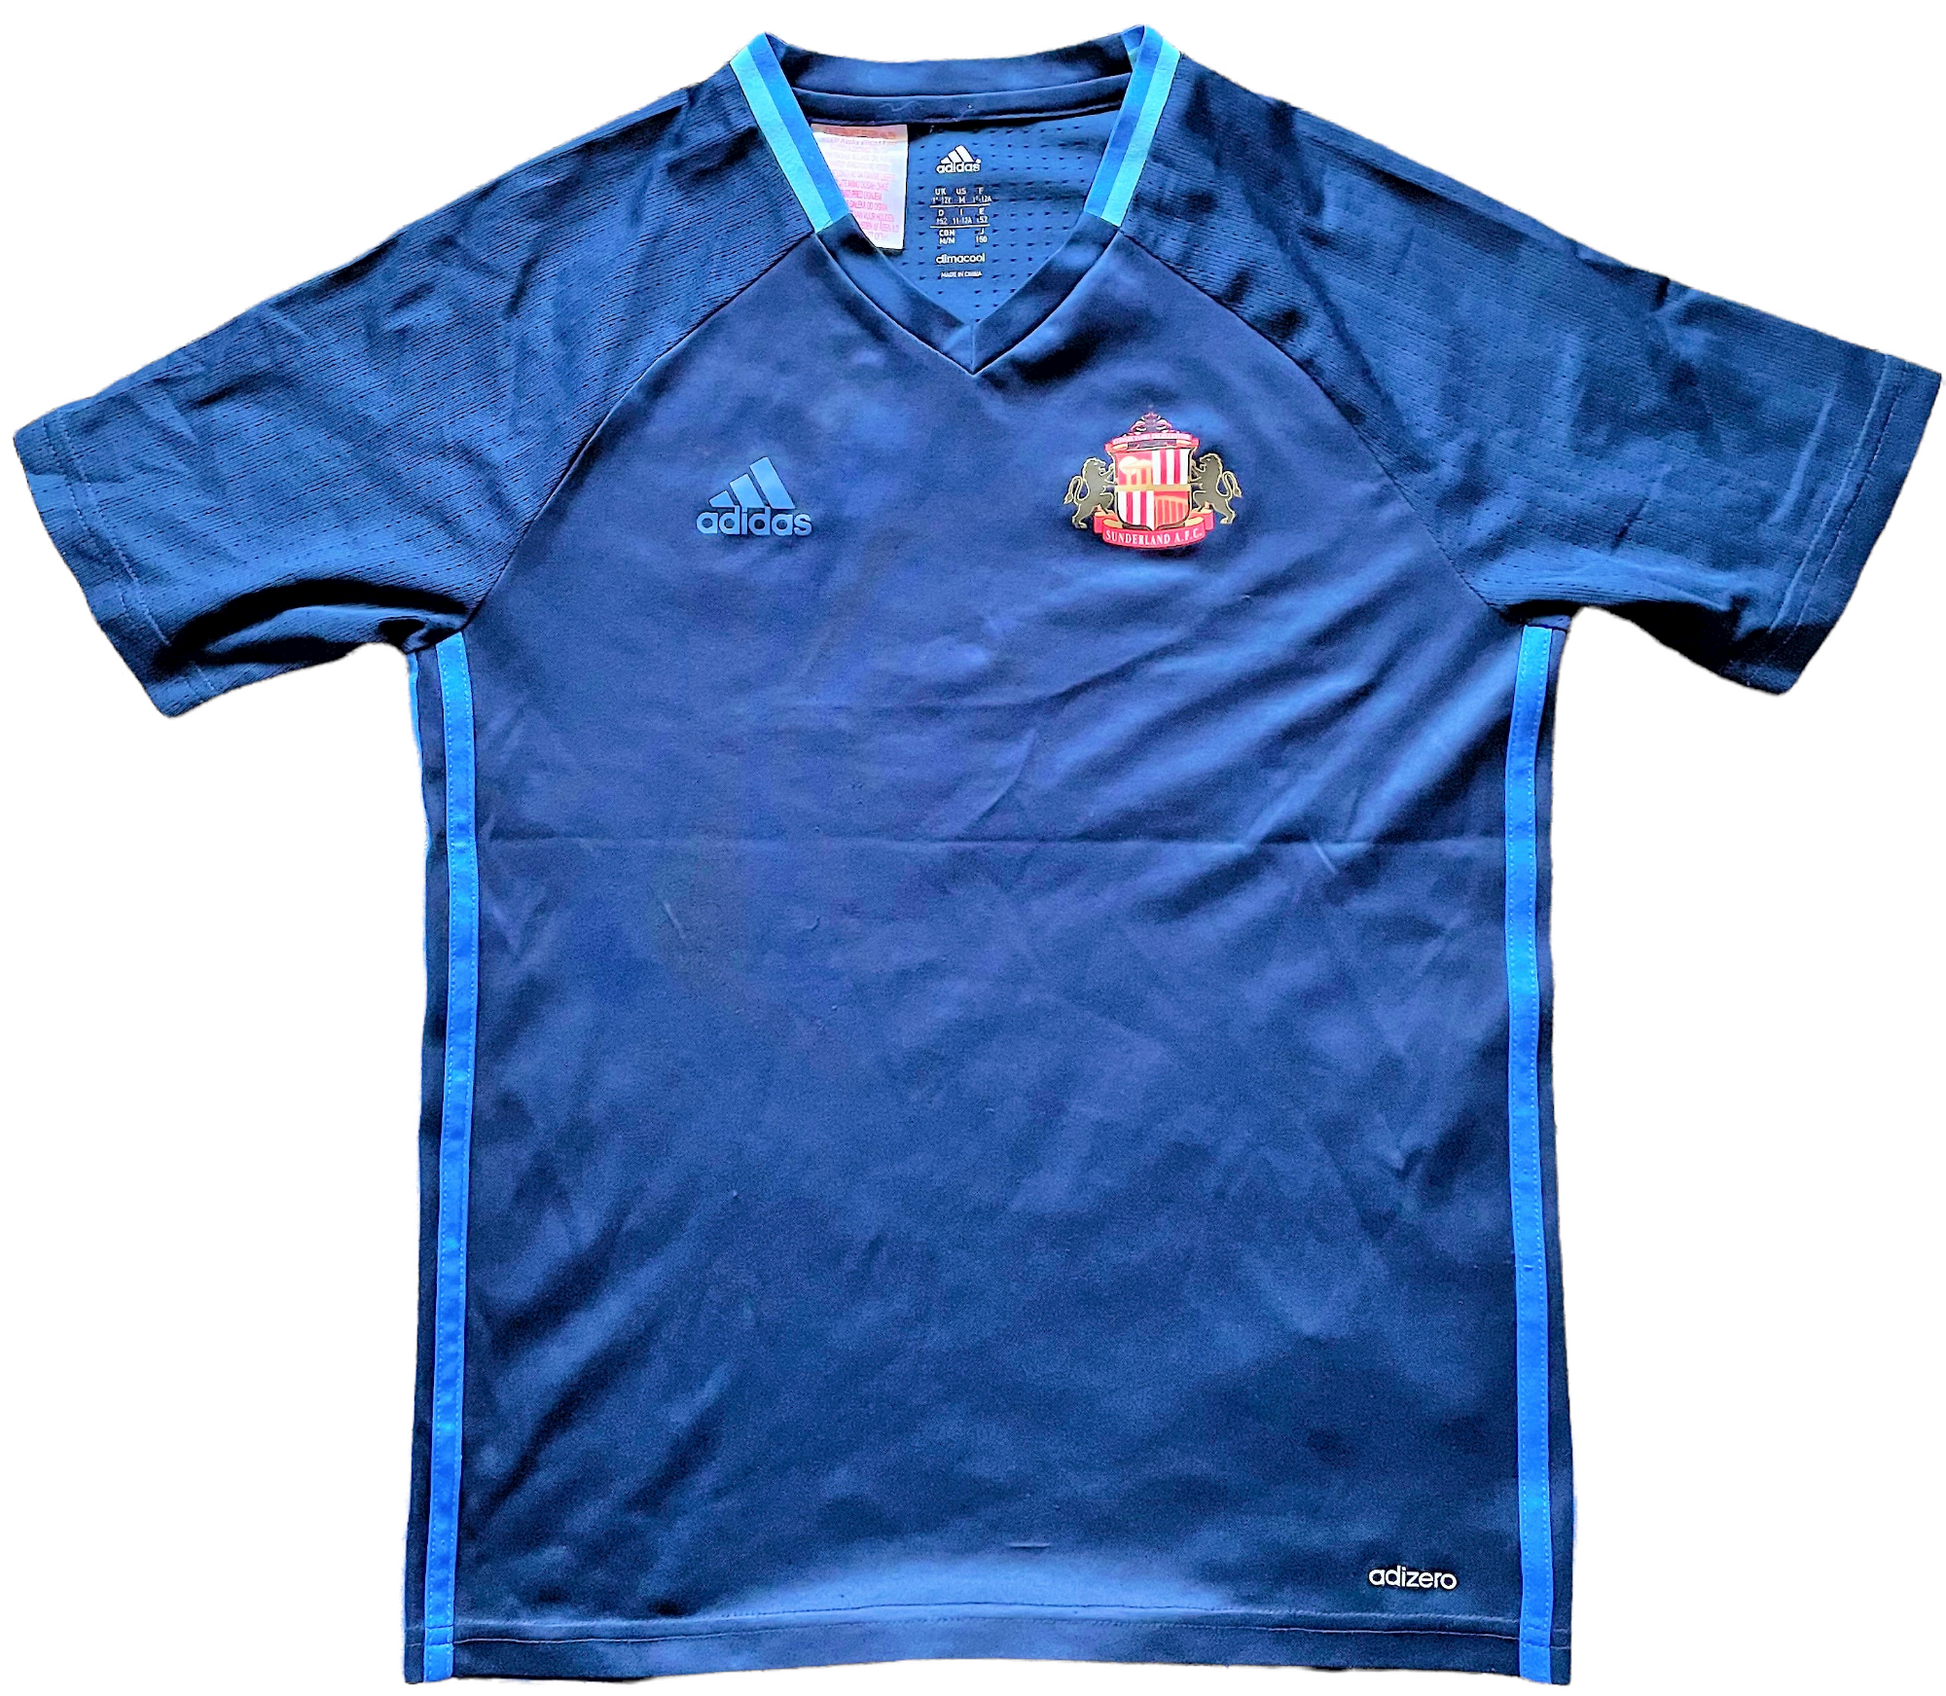 2016 Sunderland Training Shirt (excellent) 11 to 12 years